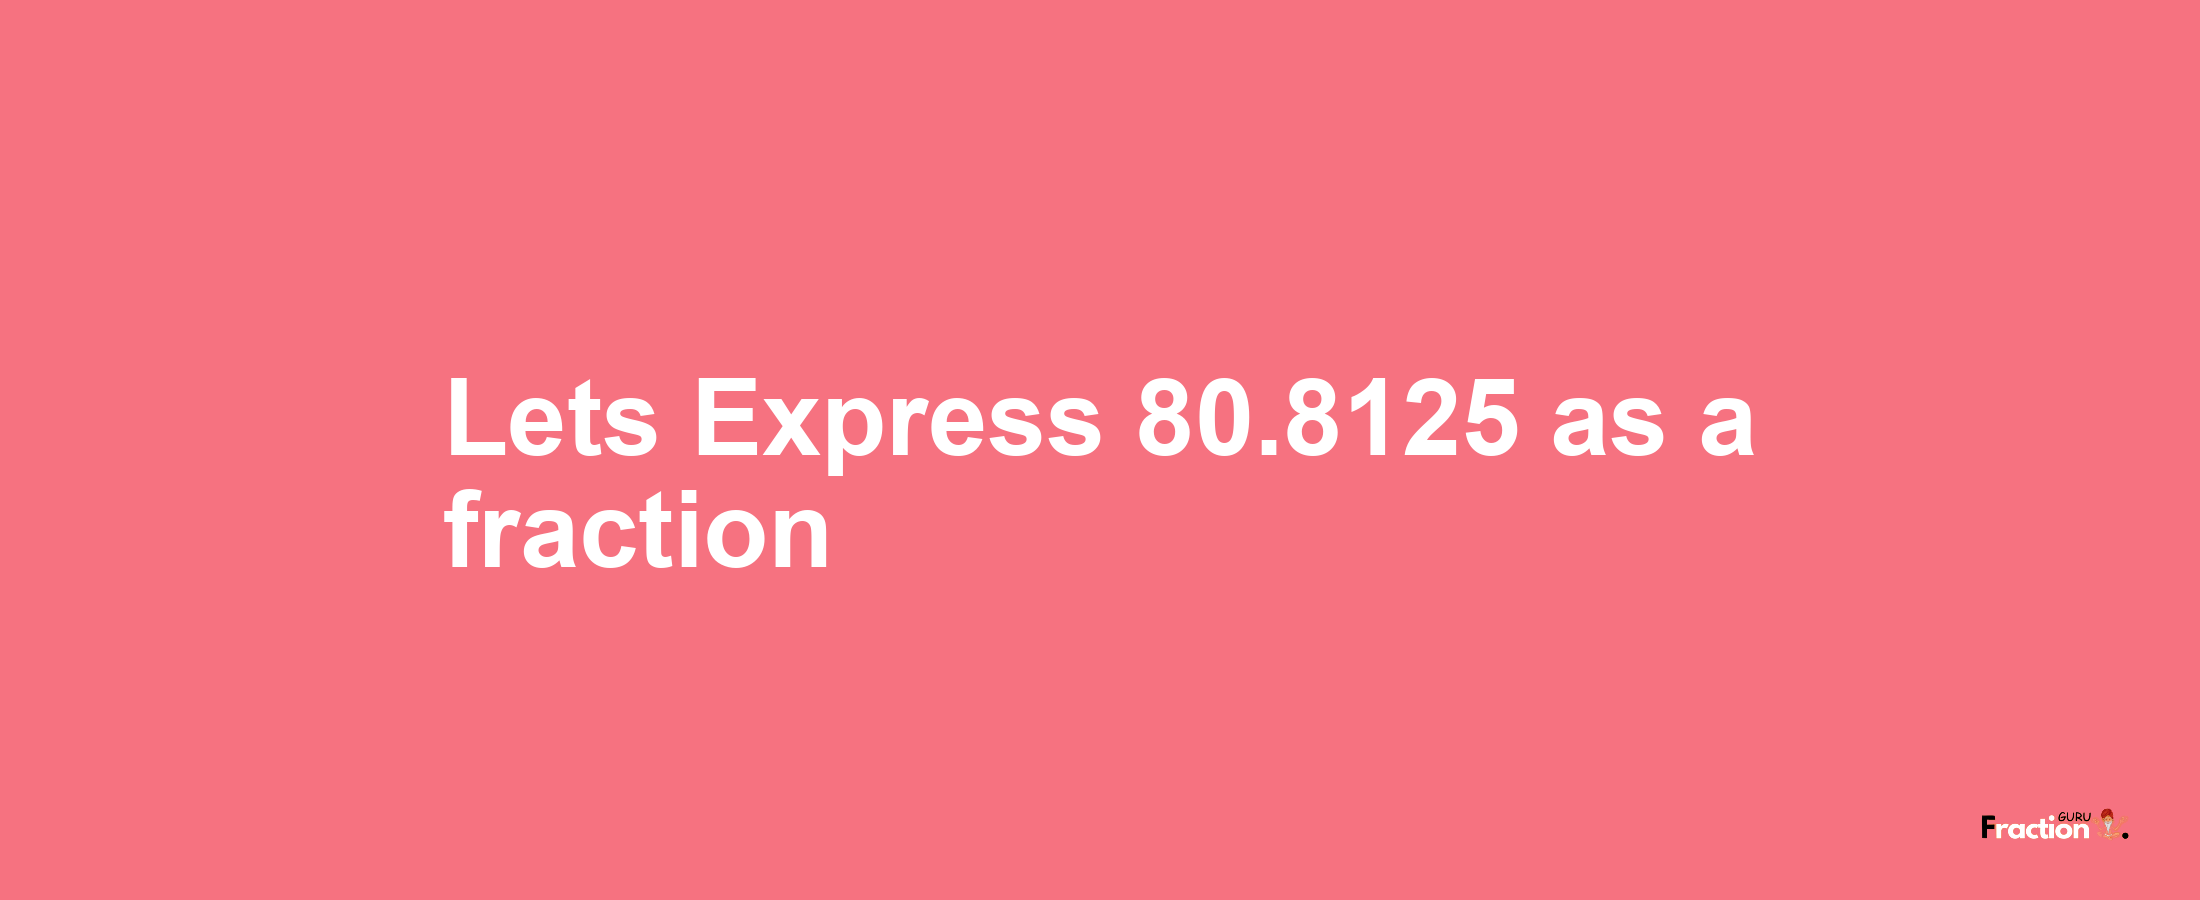 Lets Express 80.8125 as afraction